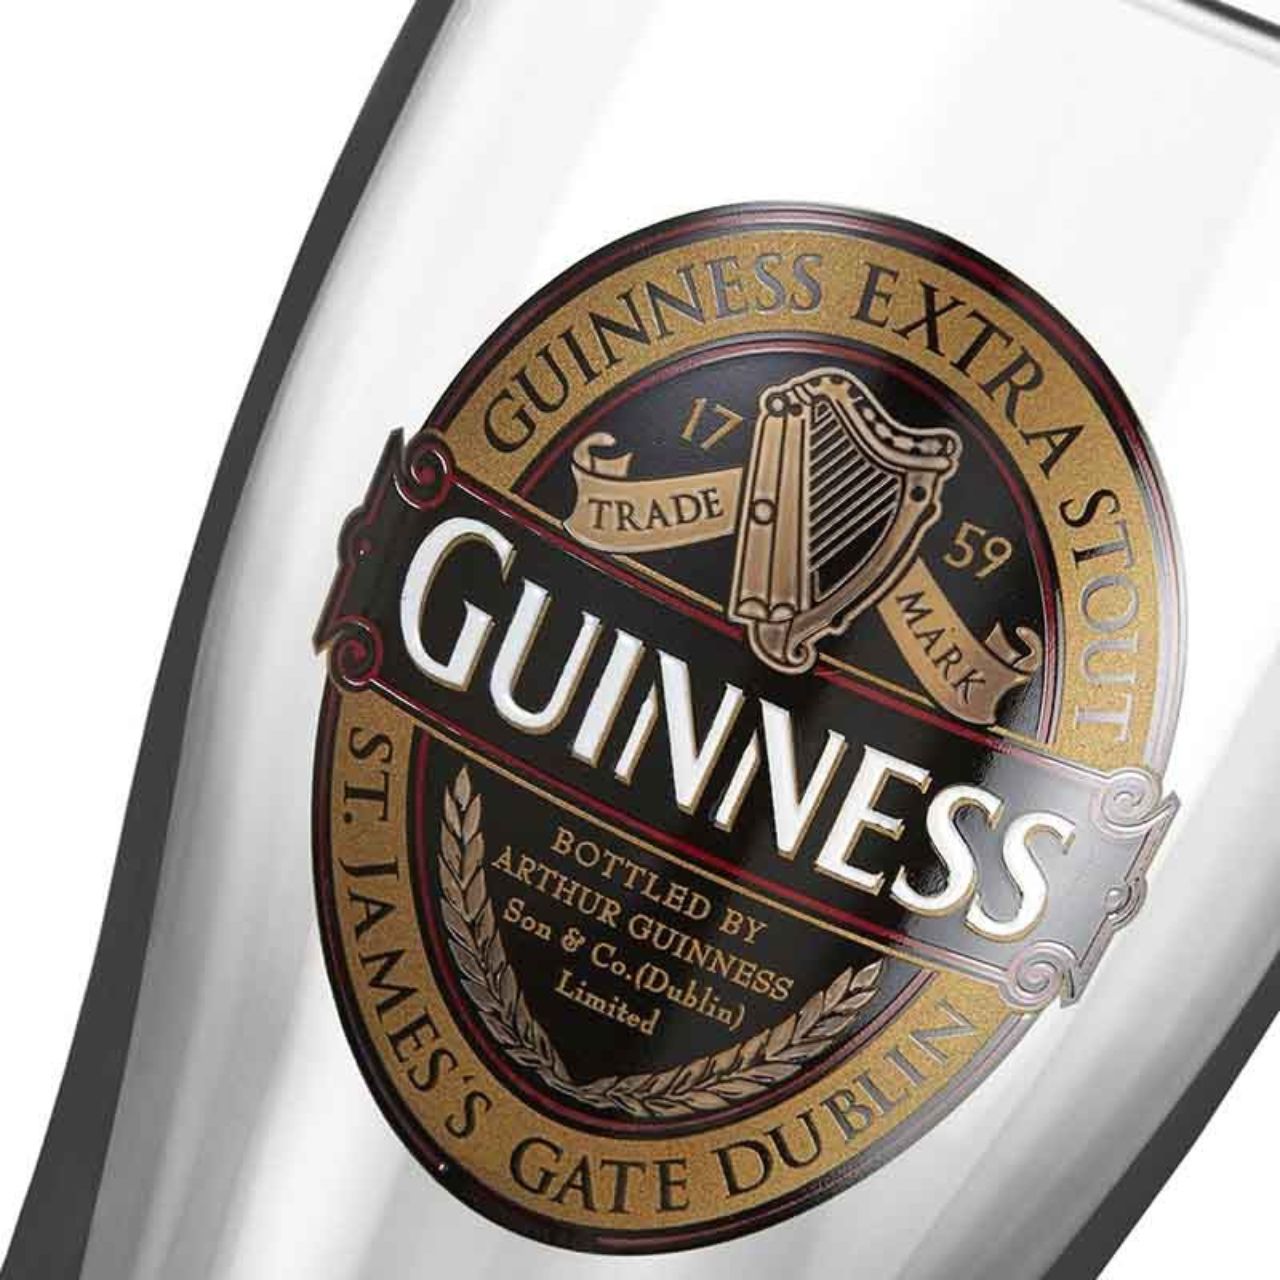 Enjoy your next pint of Guinness with lively ruby red vibes with this Guinness Ruby Red Pint Glass! This pint-sized glass come in a classically elegant, tulip-shaped silhouette, with a base neck that is narrow and gradually flares up to the brim in an elongated bulbous shape. On the front of each glass is a recreation of the Guinness Extra Stout bottle label in a radiant gold and ruby red color scheme.